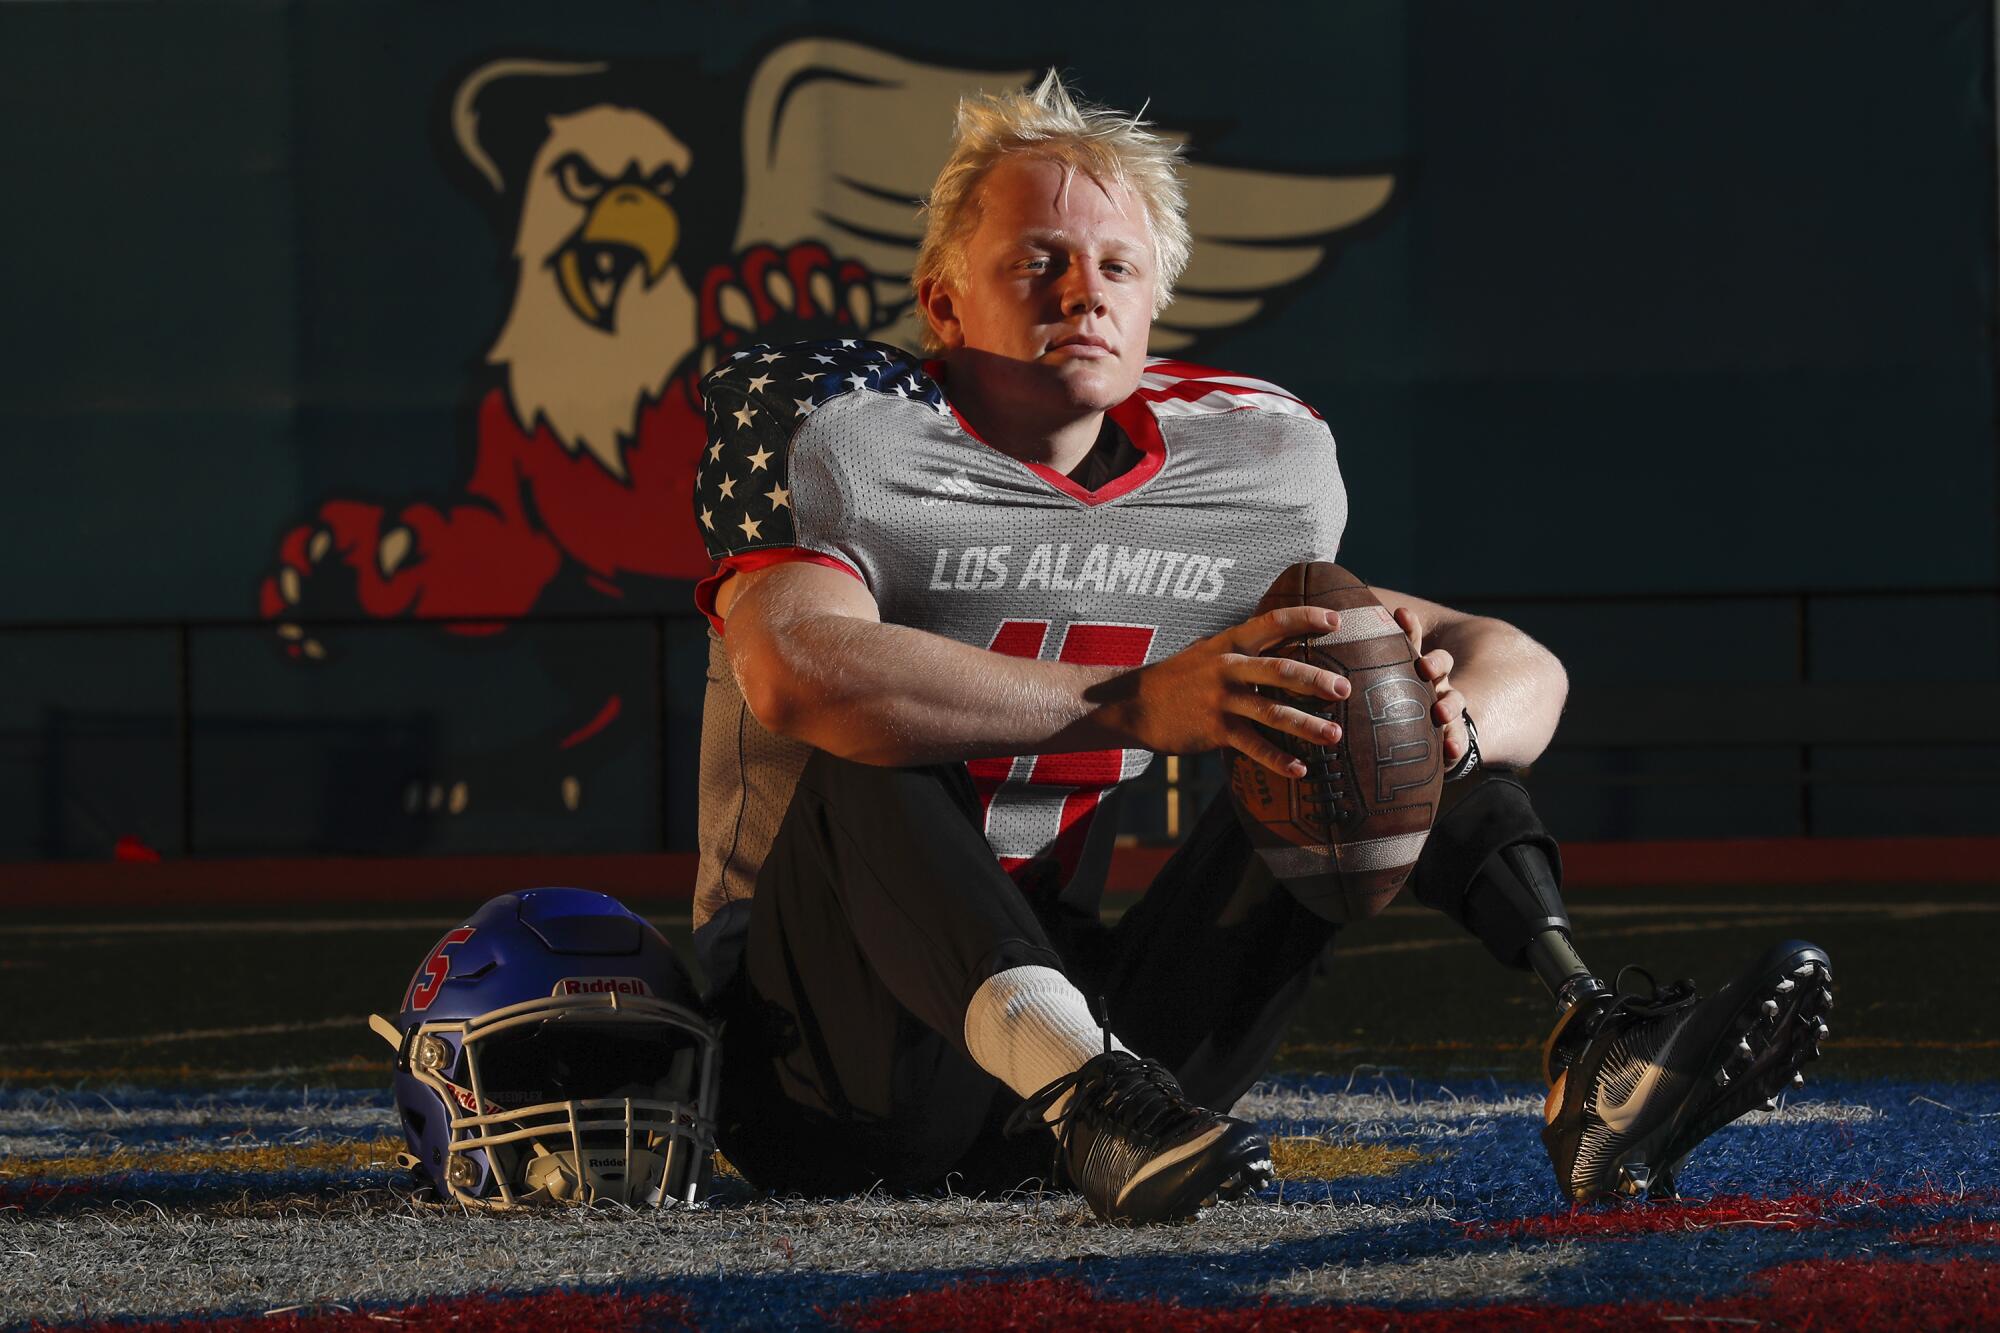 Los Alamitos long snapper Carson Fox looks at the camera while sitting on a football field.